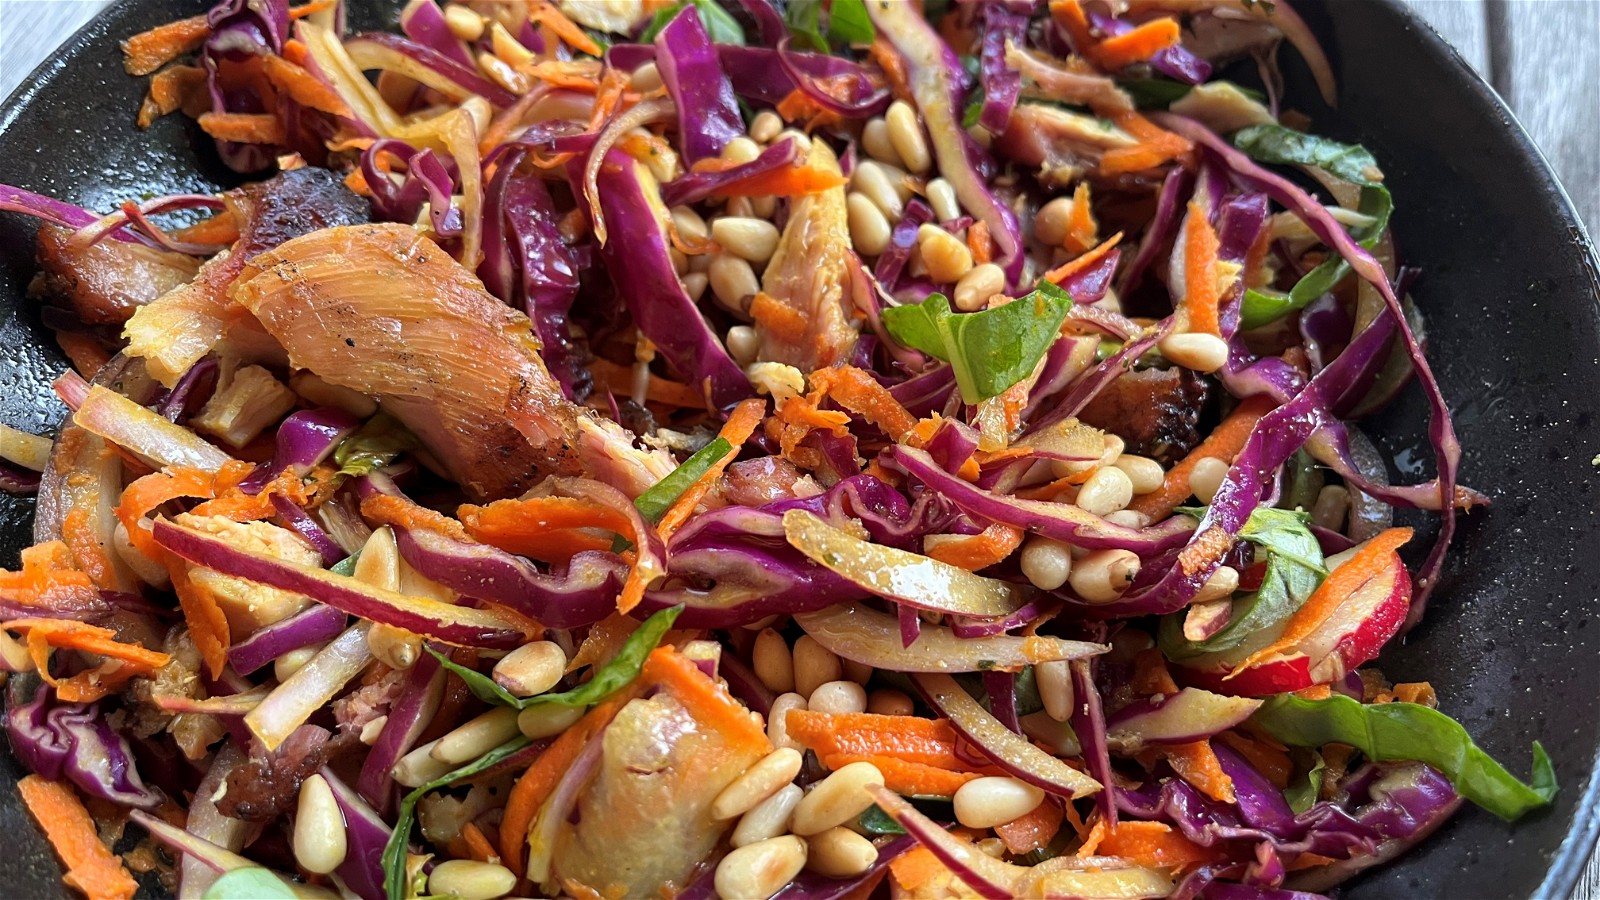 Image of Coleslaw With Carrot Turmeric Dressing